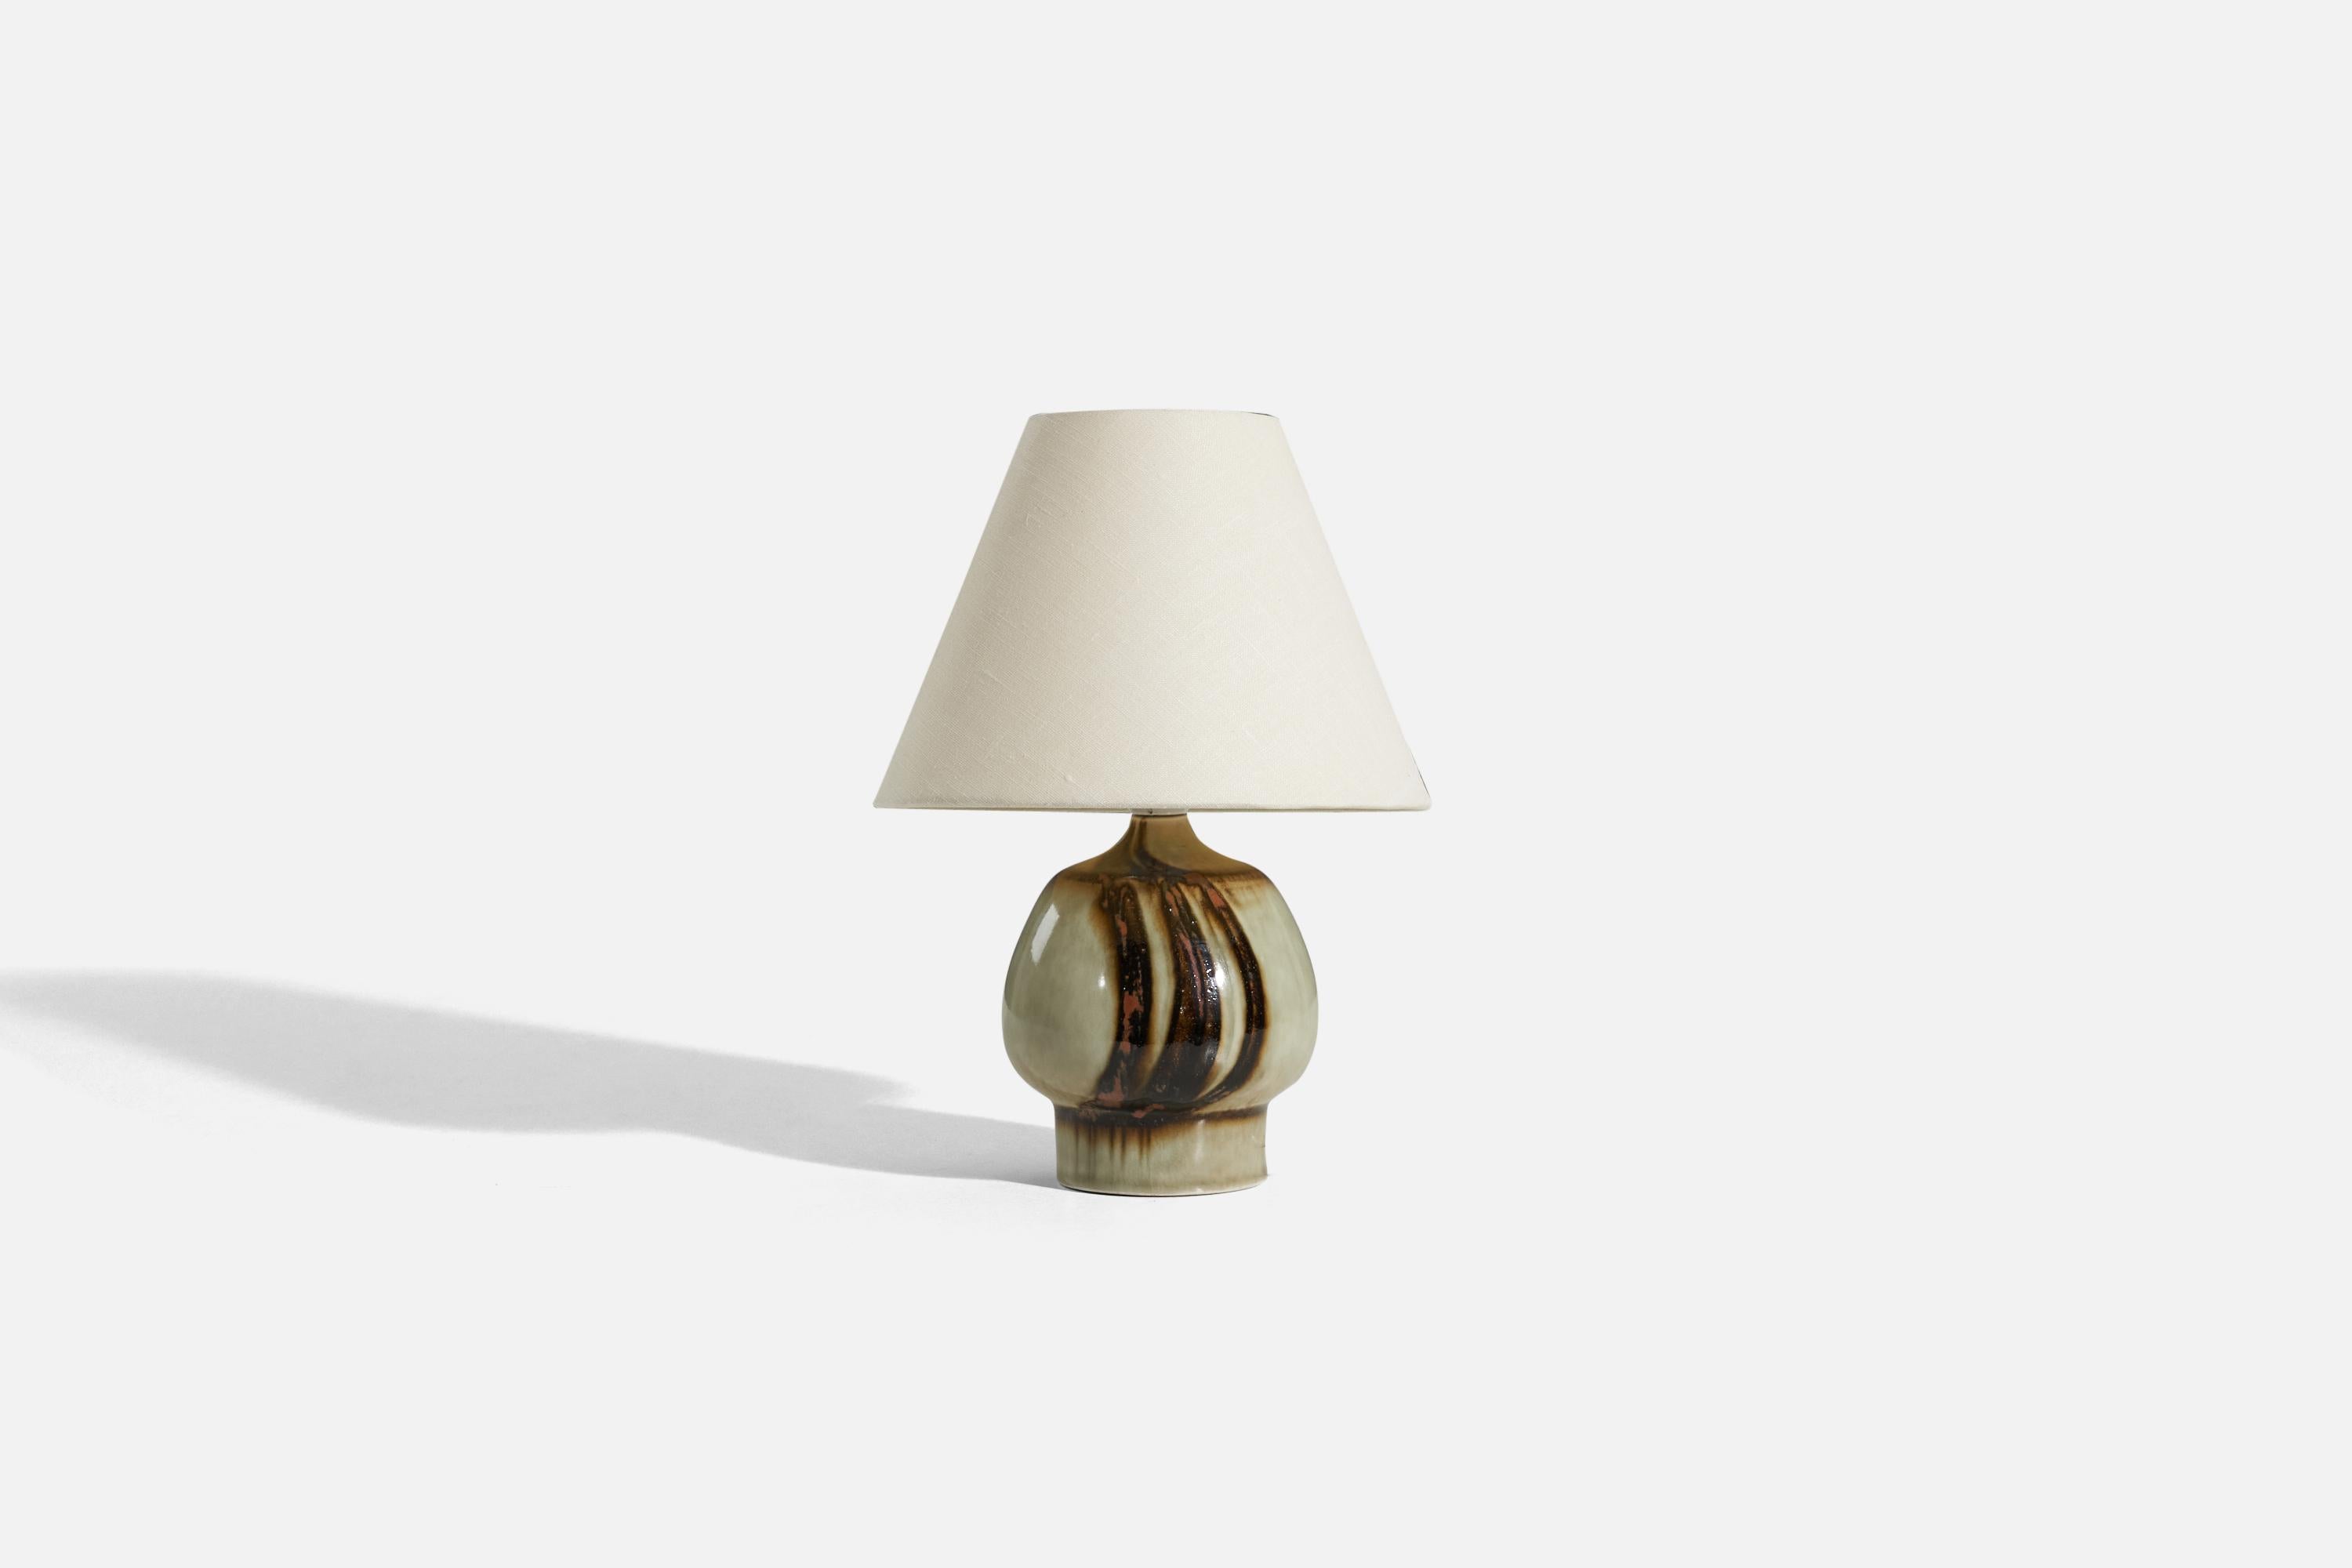 A brown and light green, glazed stoneware table lamp designed by Olle Alberius and produced by Rörstrand, Sweden, 1960s. 

Sold without lampshade. 
Dimensions of Lamp (inches) : 7.625 x 4.75 x 4.75 (H x W x D)
Dimensions of Shade (inches) : 4 x